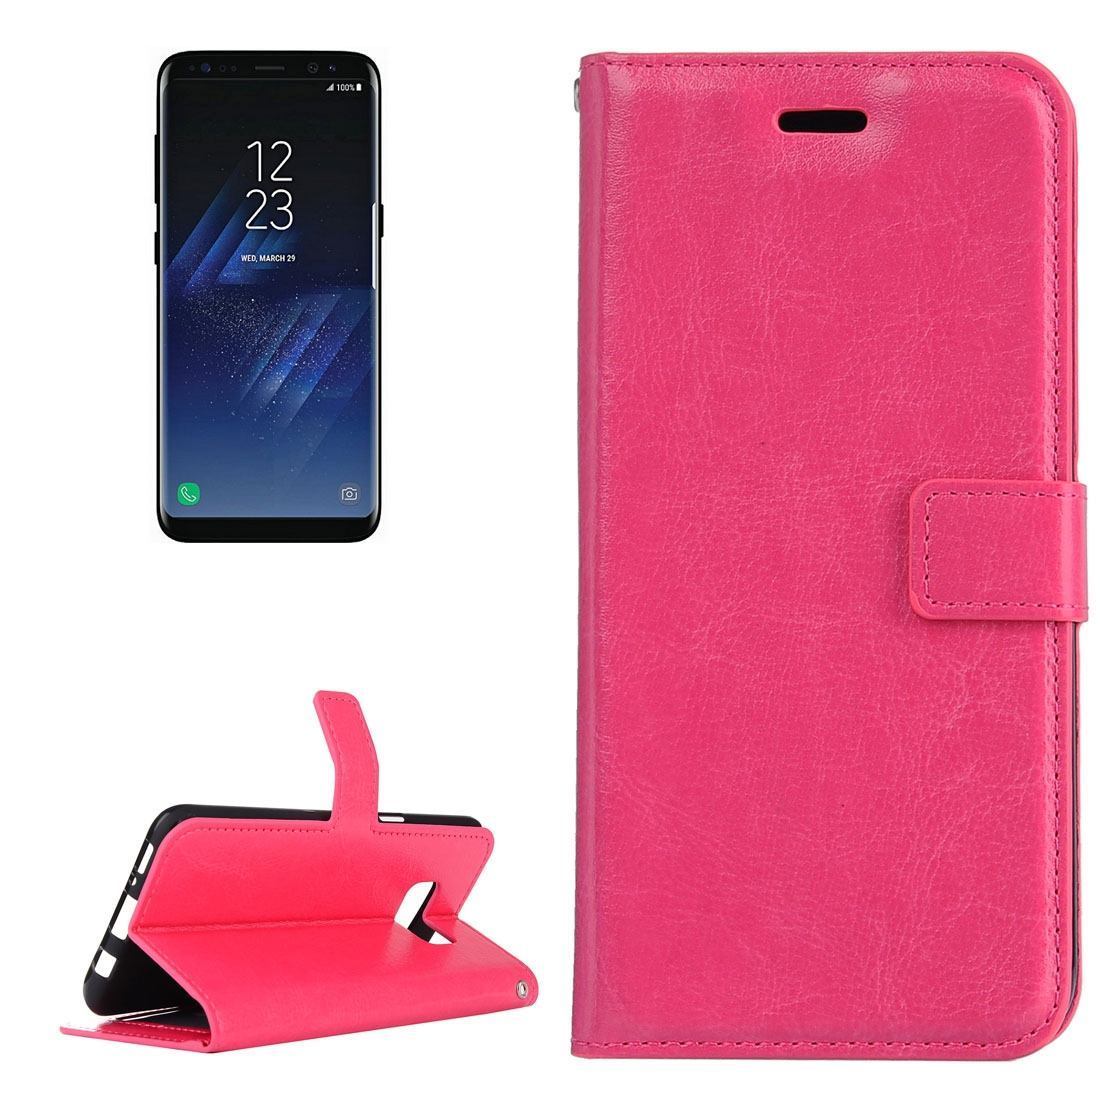 For Samsung Galaxy S8 Case,Elegant Retro Horse Textured Leather Cover,Magenta